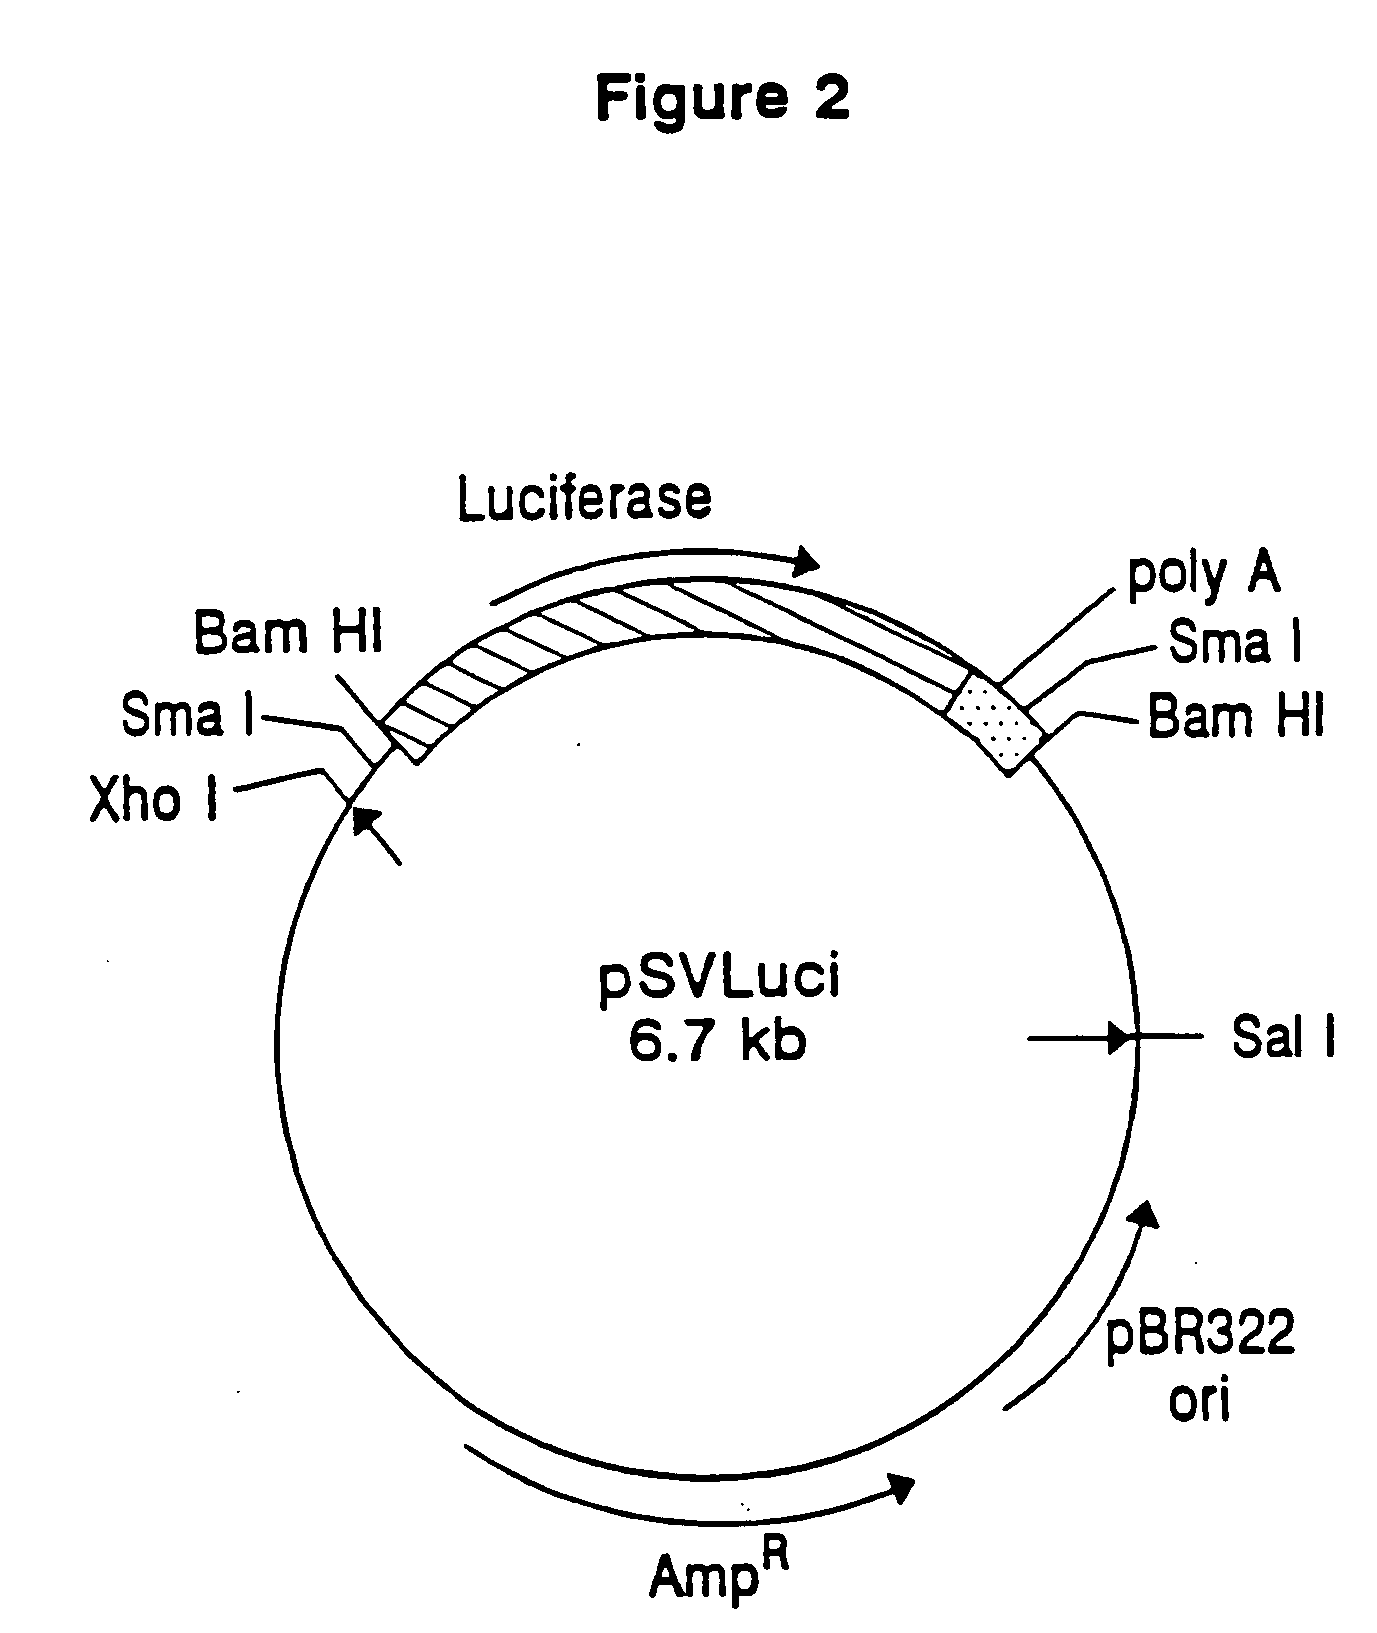 Methods of discovering chemicals capable of functioning as gene expression modulators